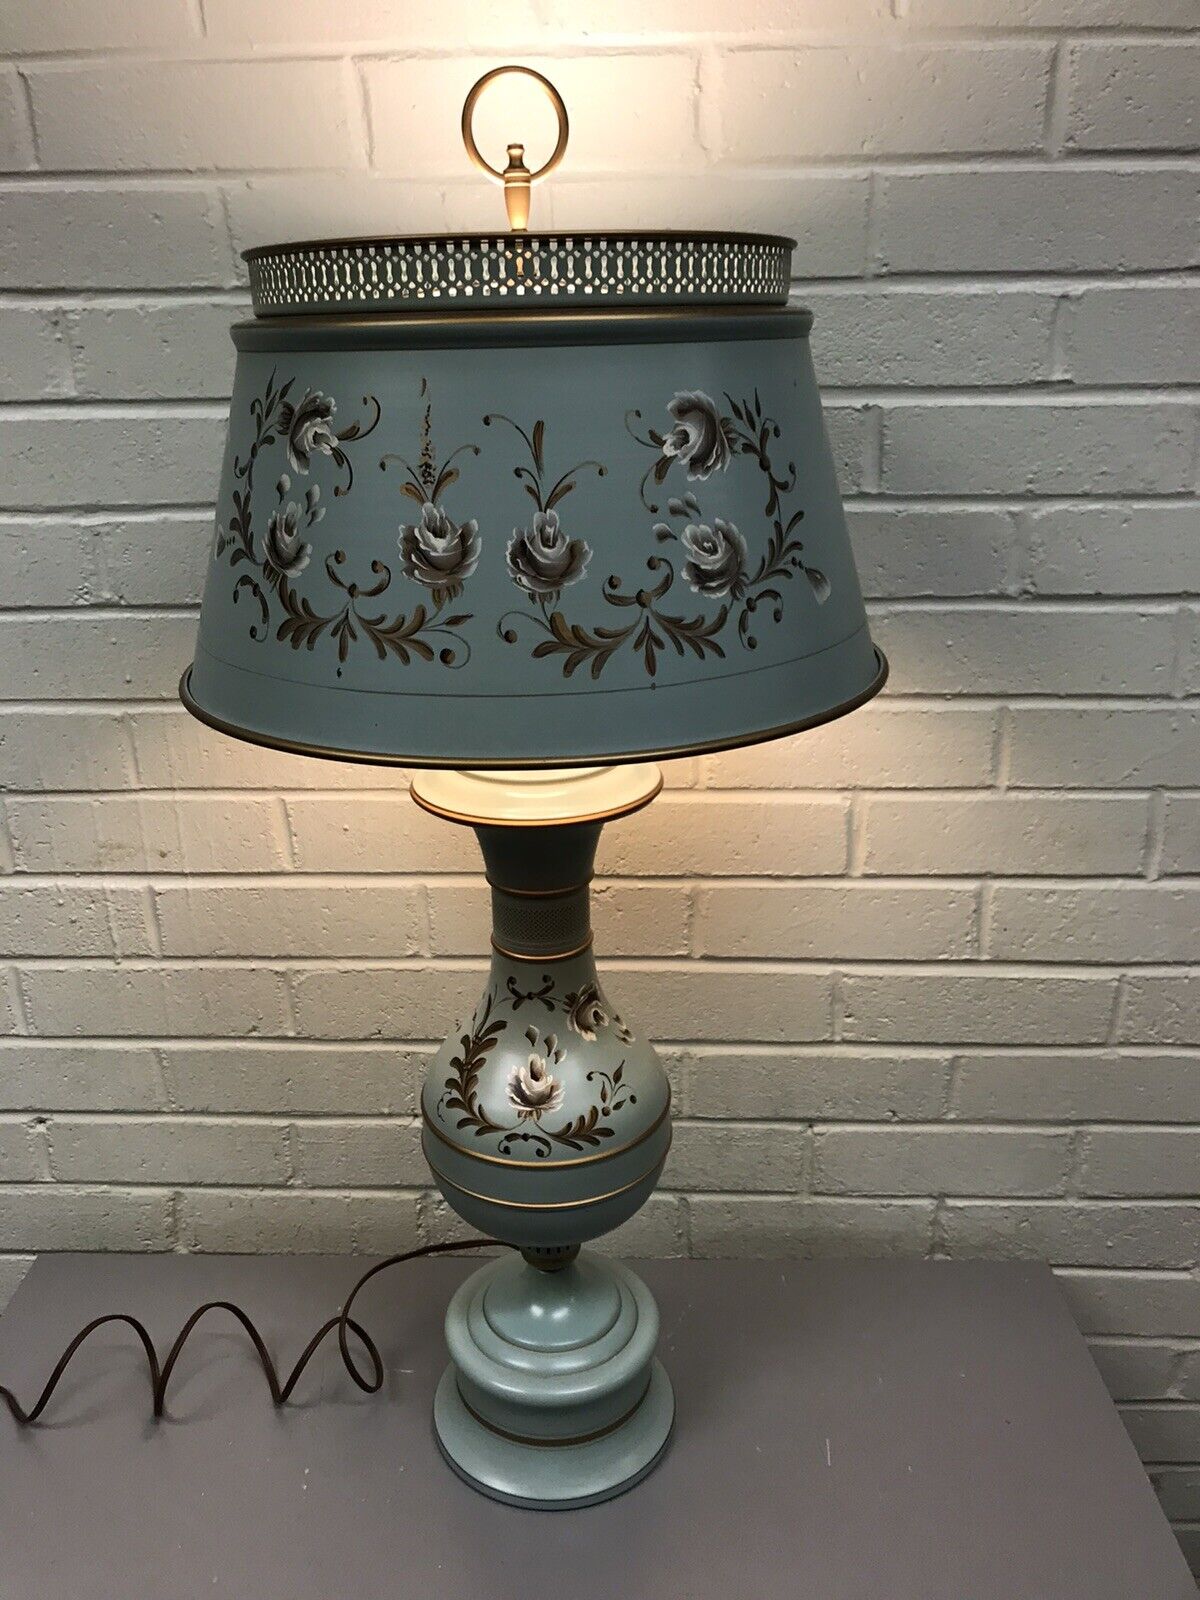 VTG BEAUTIFUL DUSTY BLUE TOLE PAINT LAMP AND SHADE 32” TALL 3 WAY SWITCH